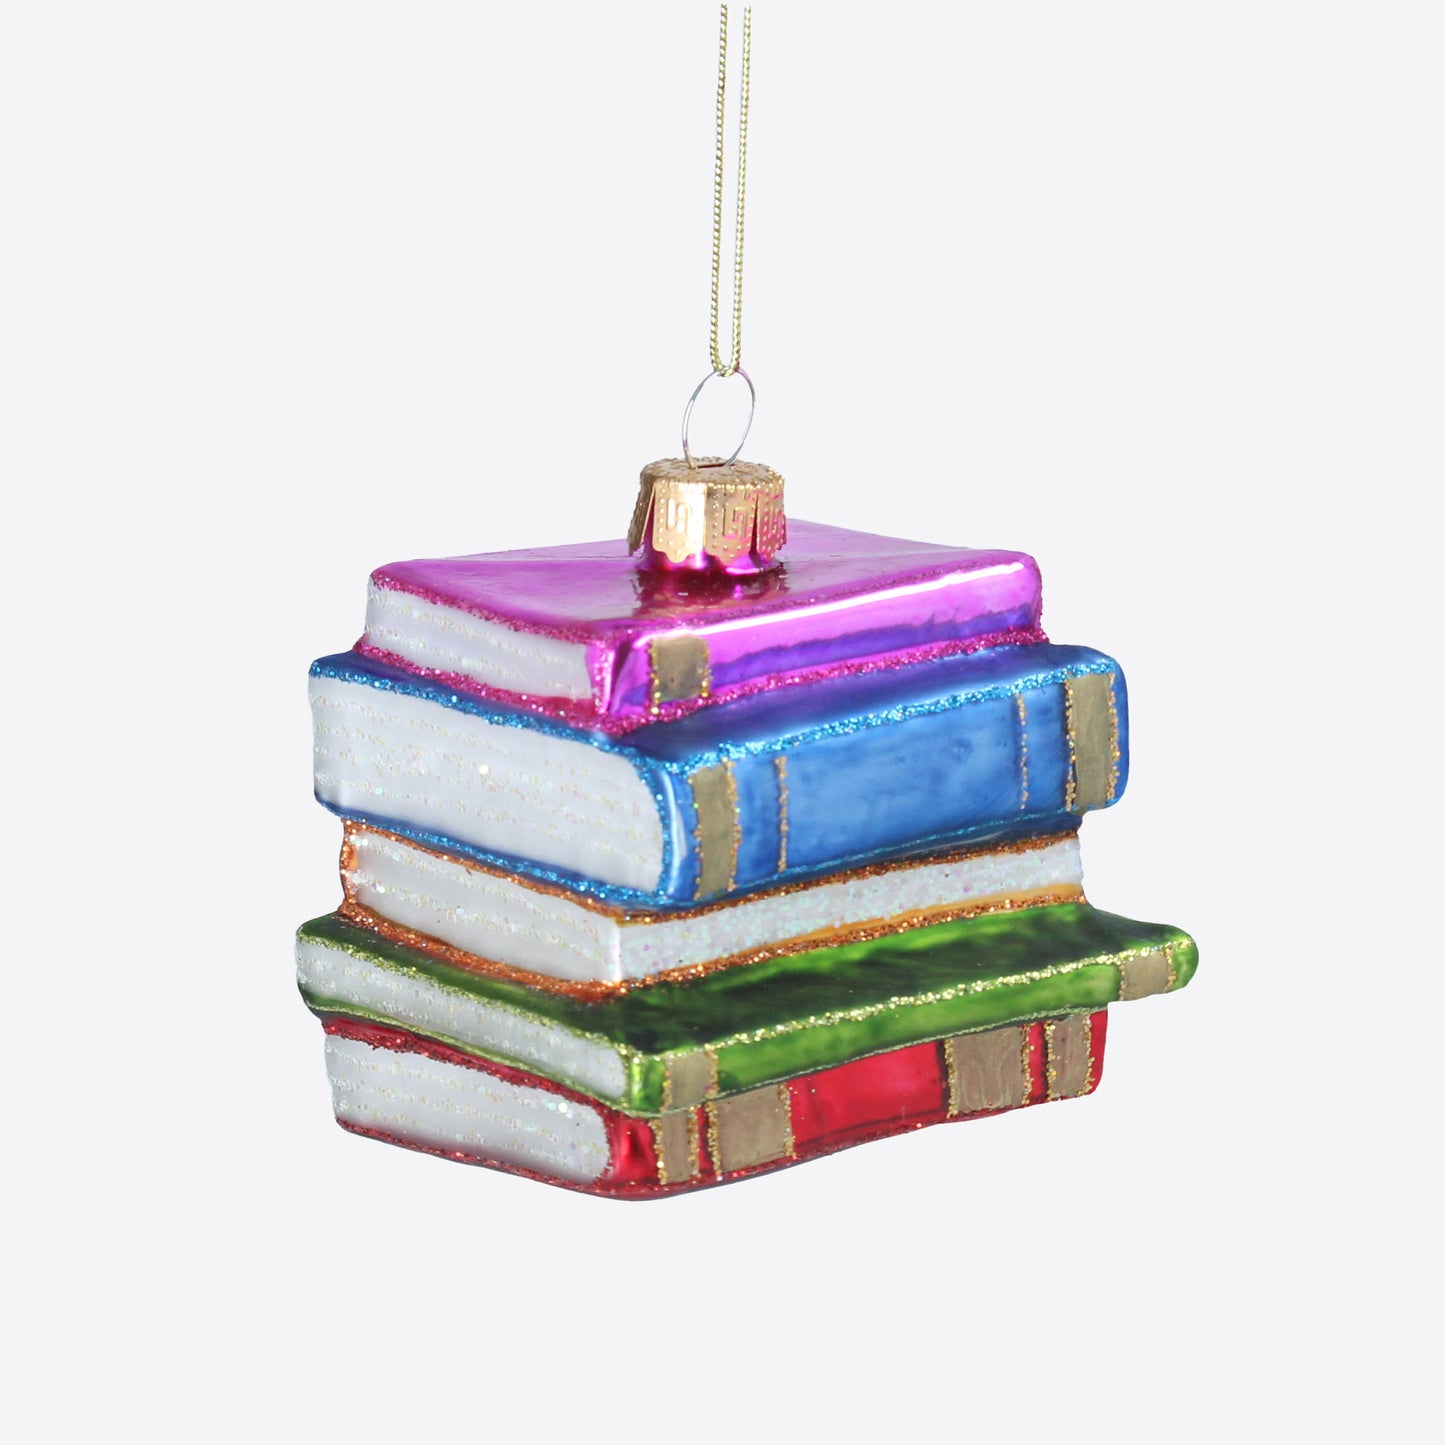 Glass Stack of Books Dec Not specified